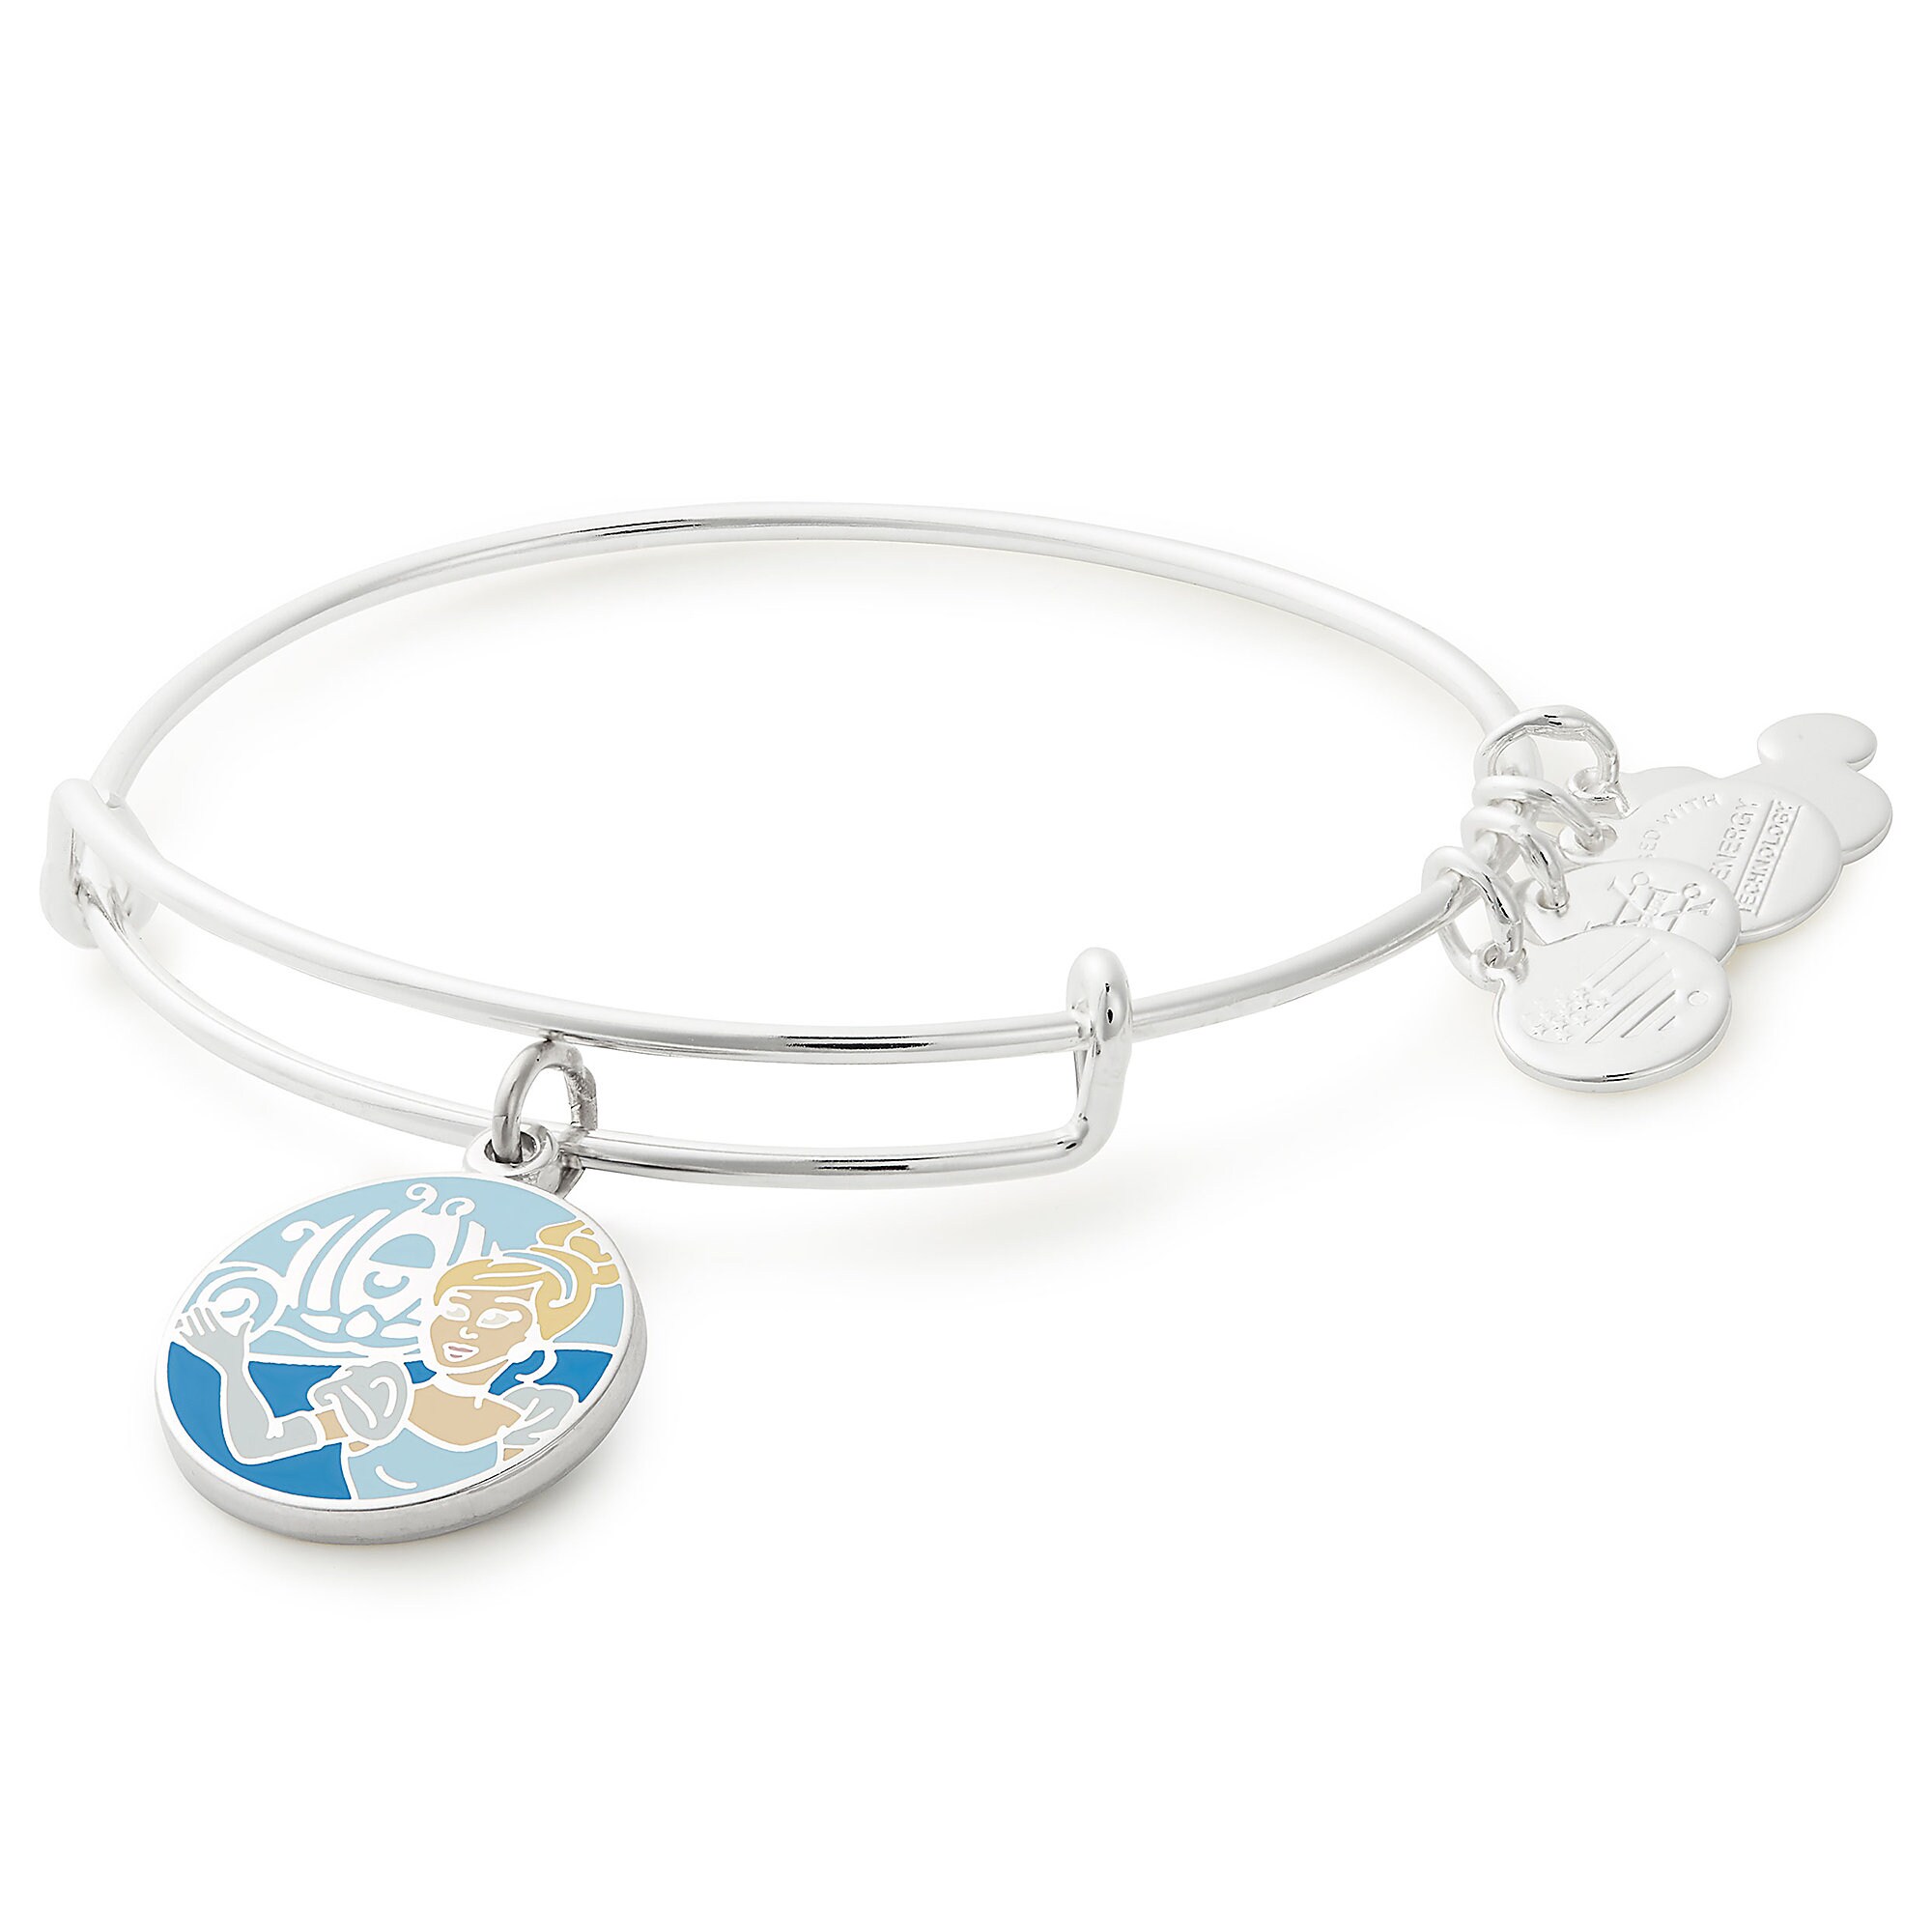 Cinderella ''Have courage and be kind'' Bangle by Alex and Ani was ...